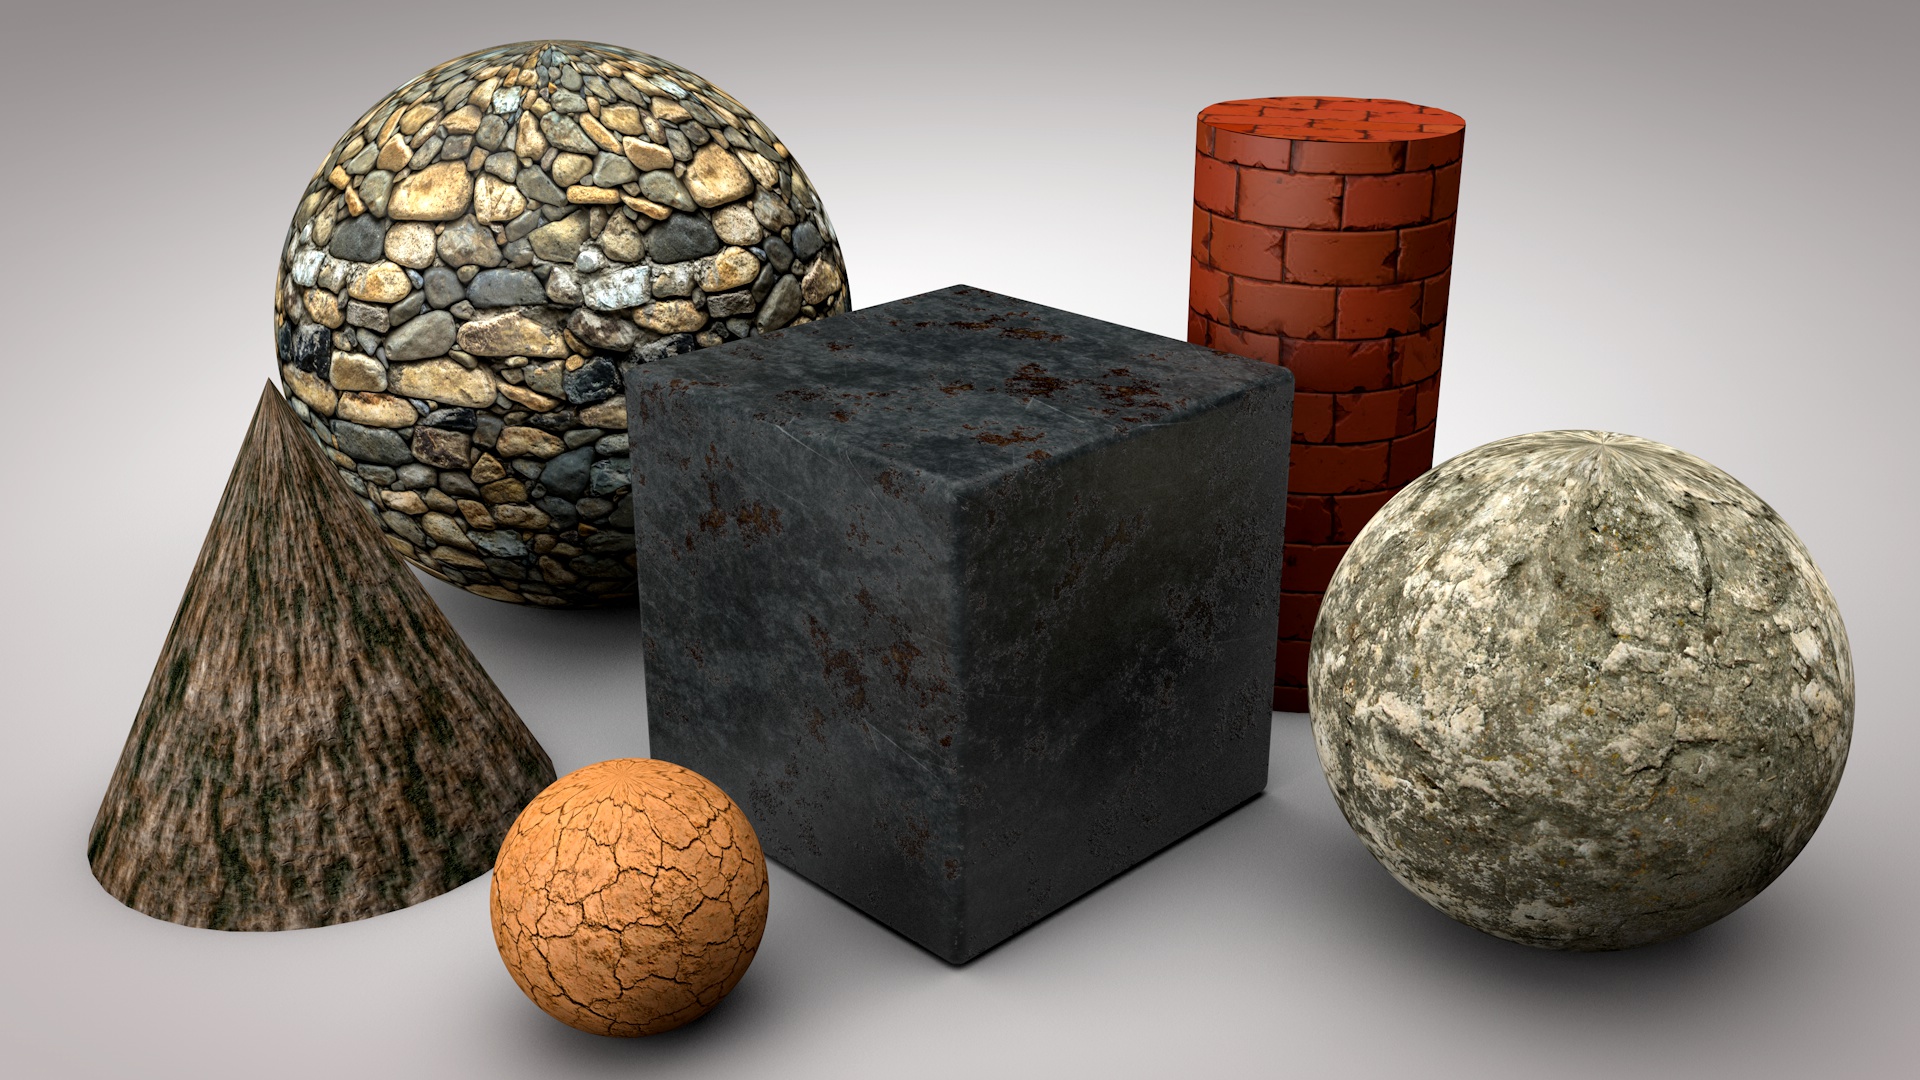 Cinema 4D Materials – How to Make Realistic Material in Cinema 4D